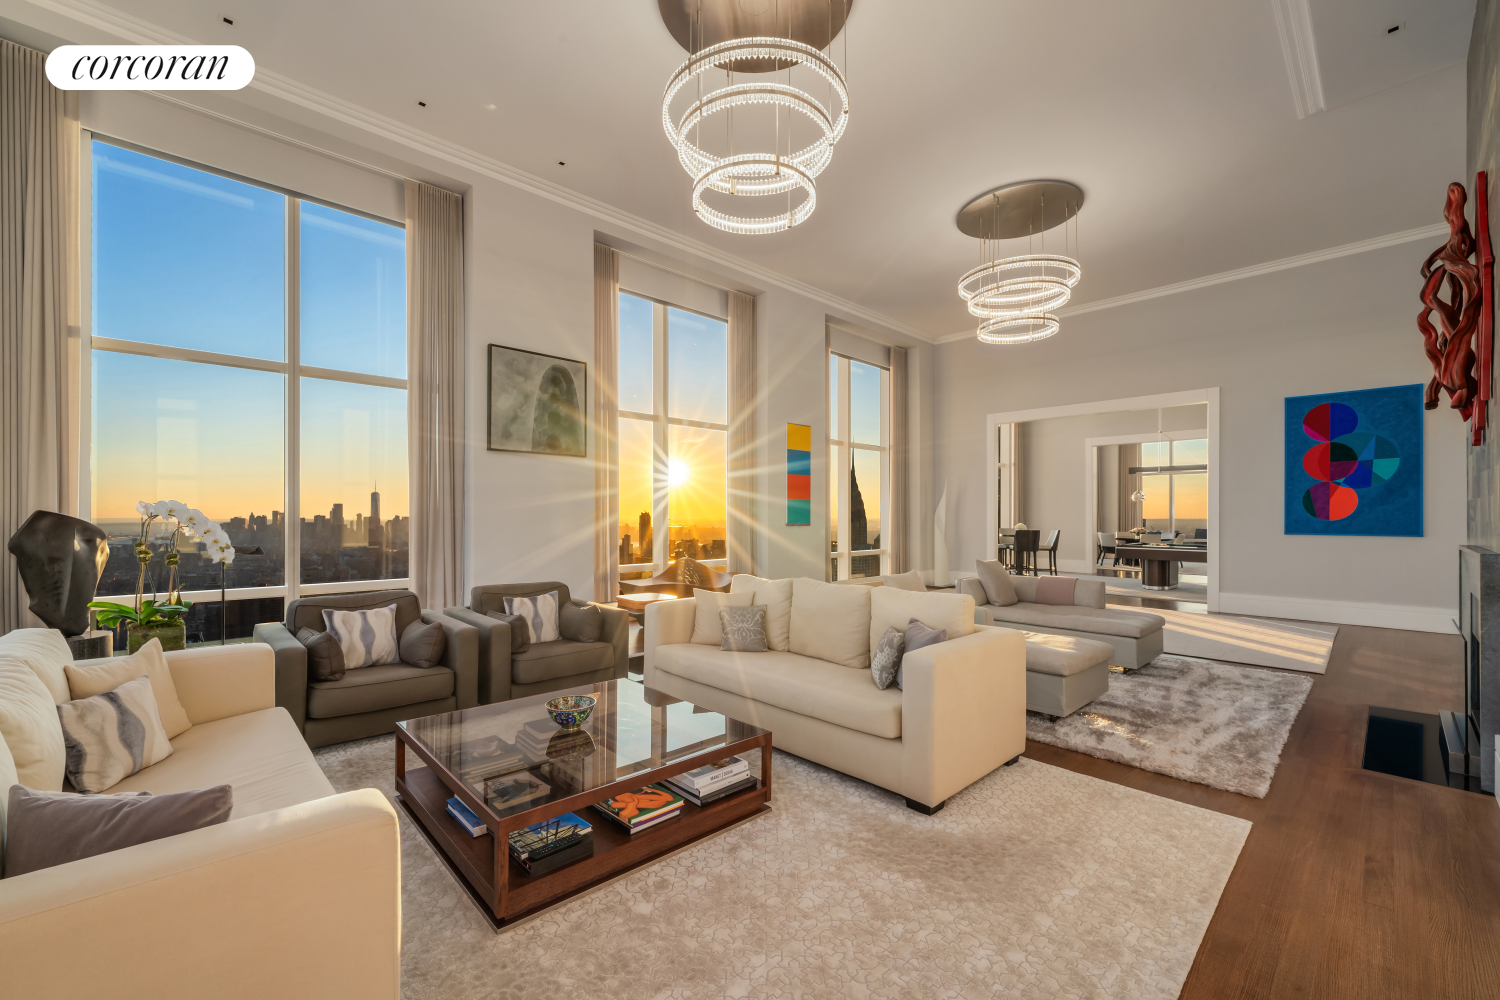 845 United Nations Plaza Ph88b, Turtle Bay, Midtown East, NYC - 4 Bedrooms  
3.5 Bathrooms  
8 Rooms - 